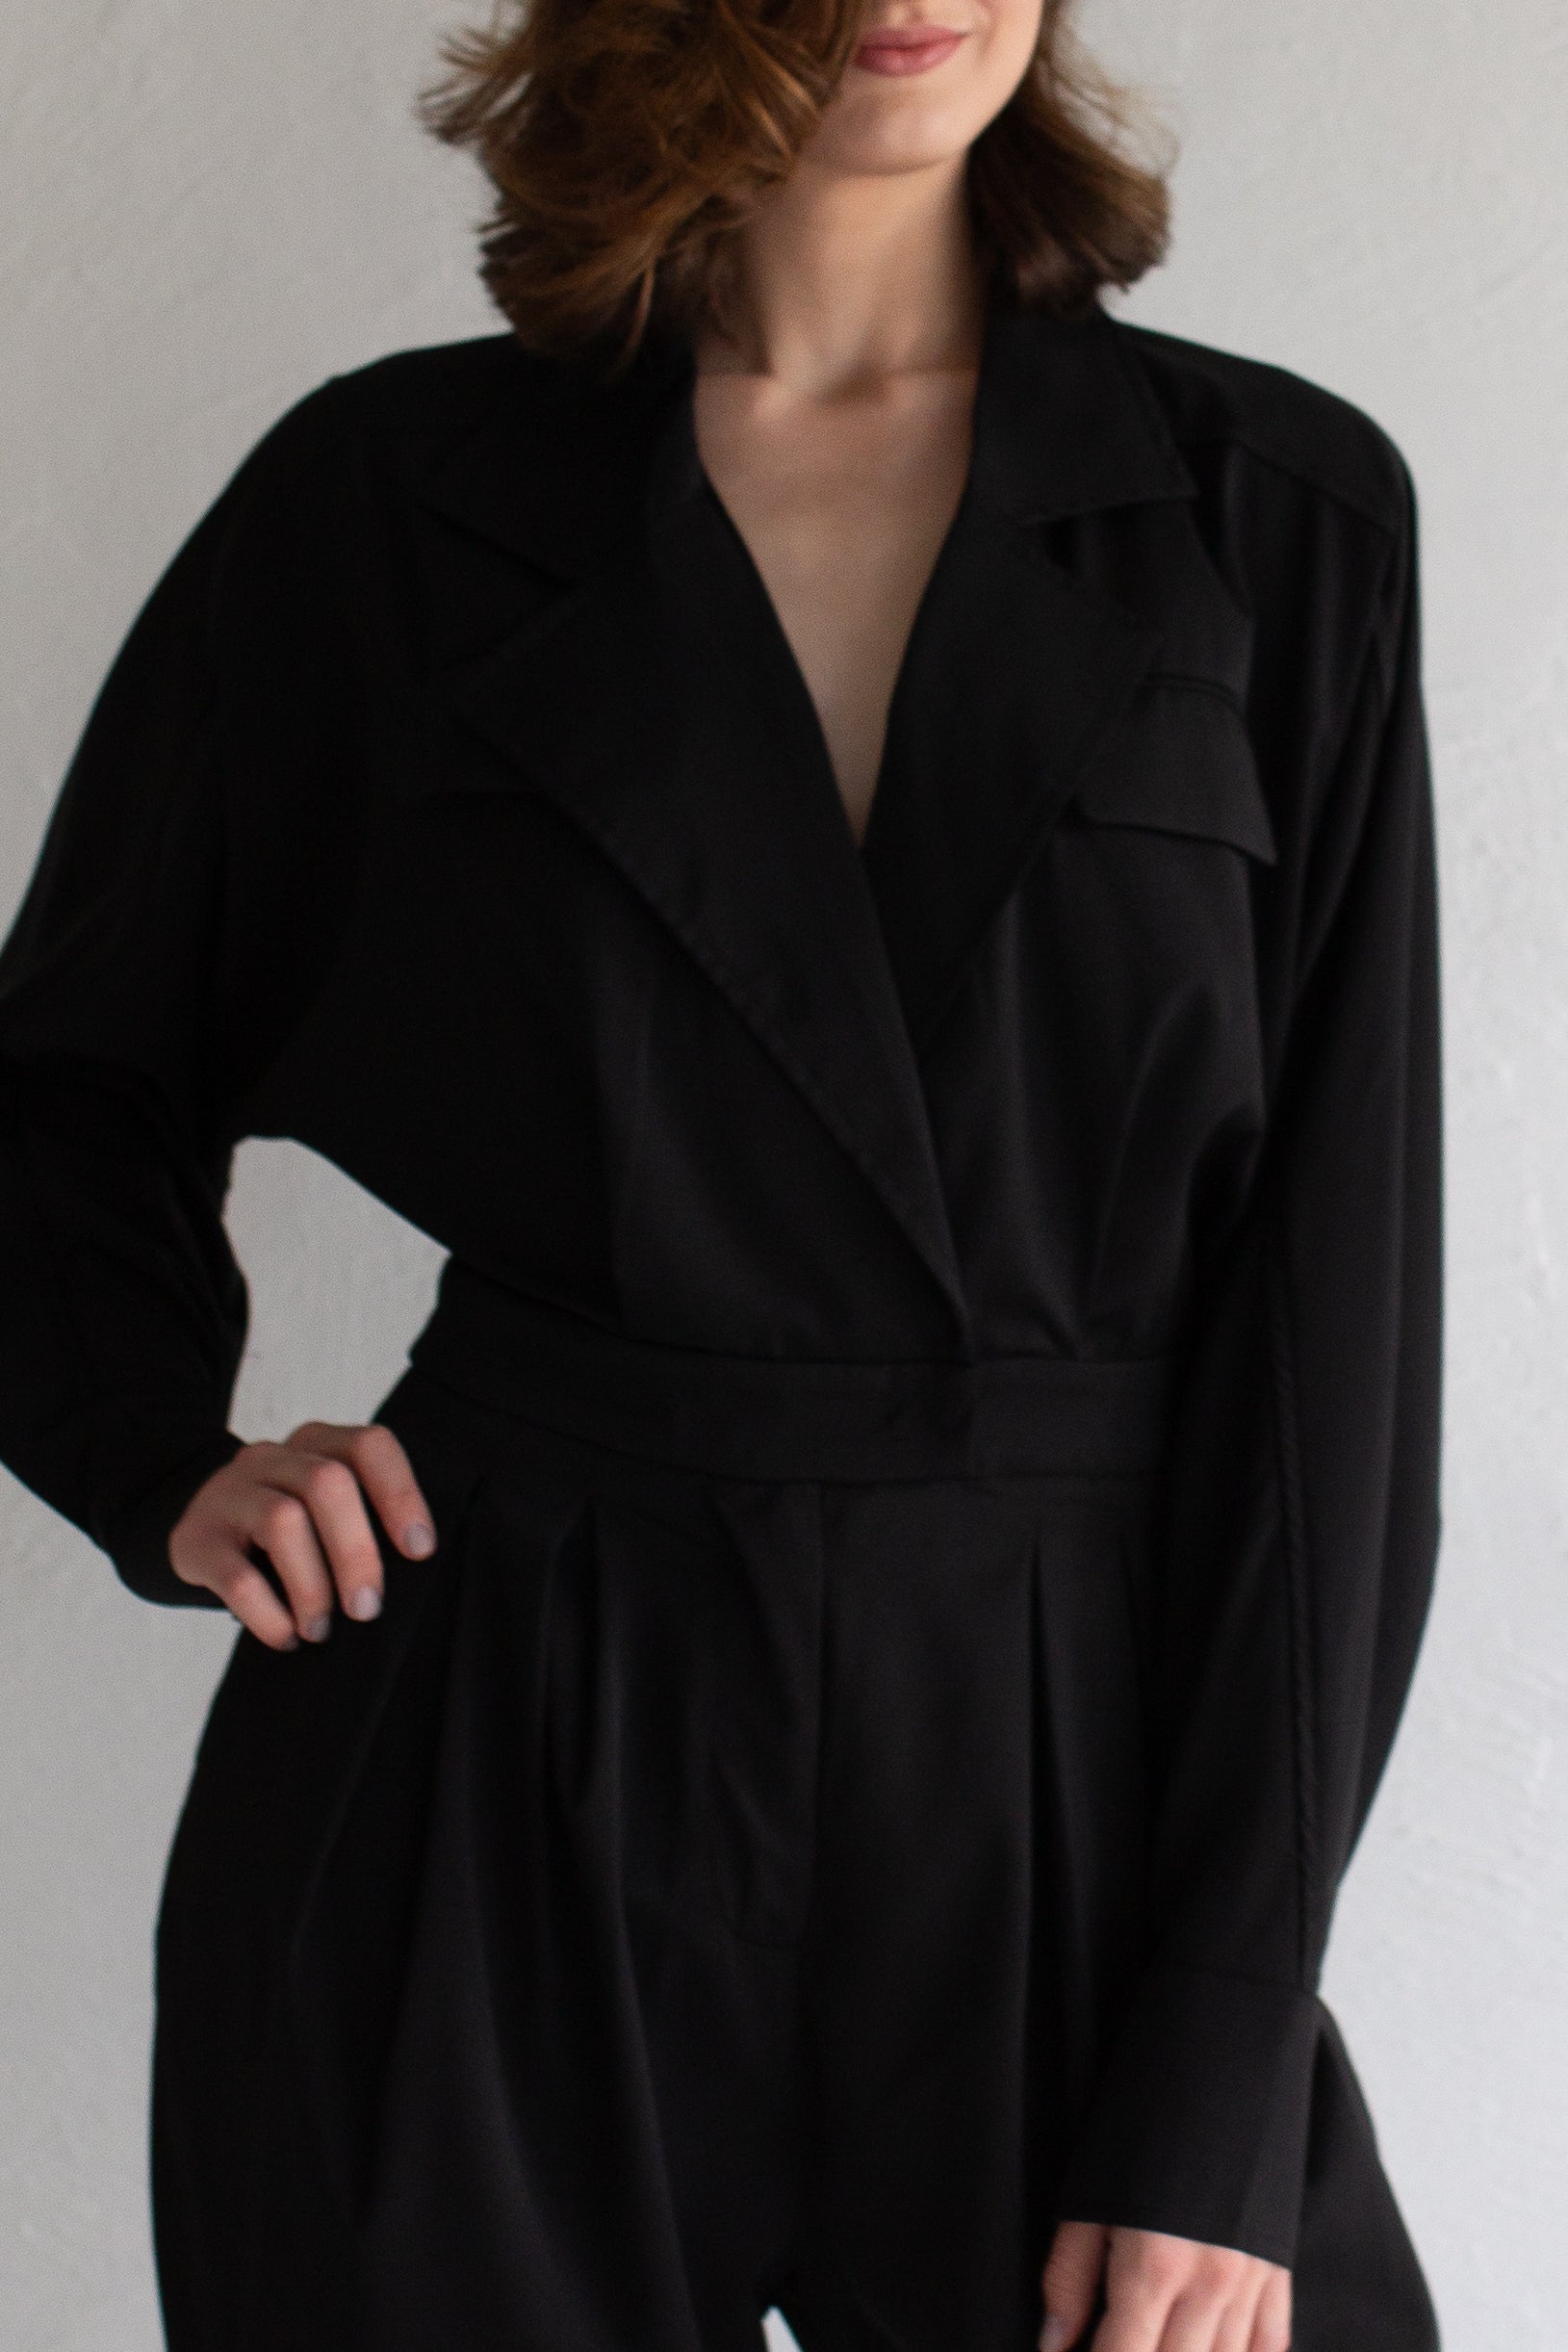 The Pintuck Jumpsuit in Black